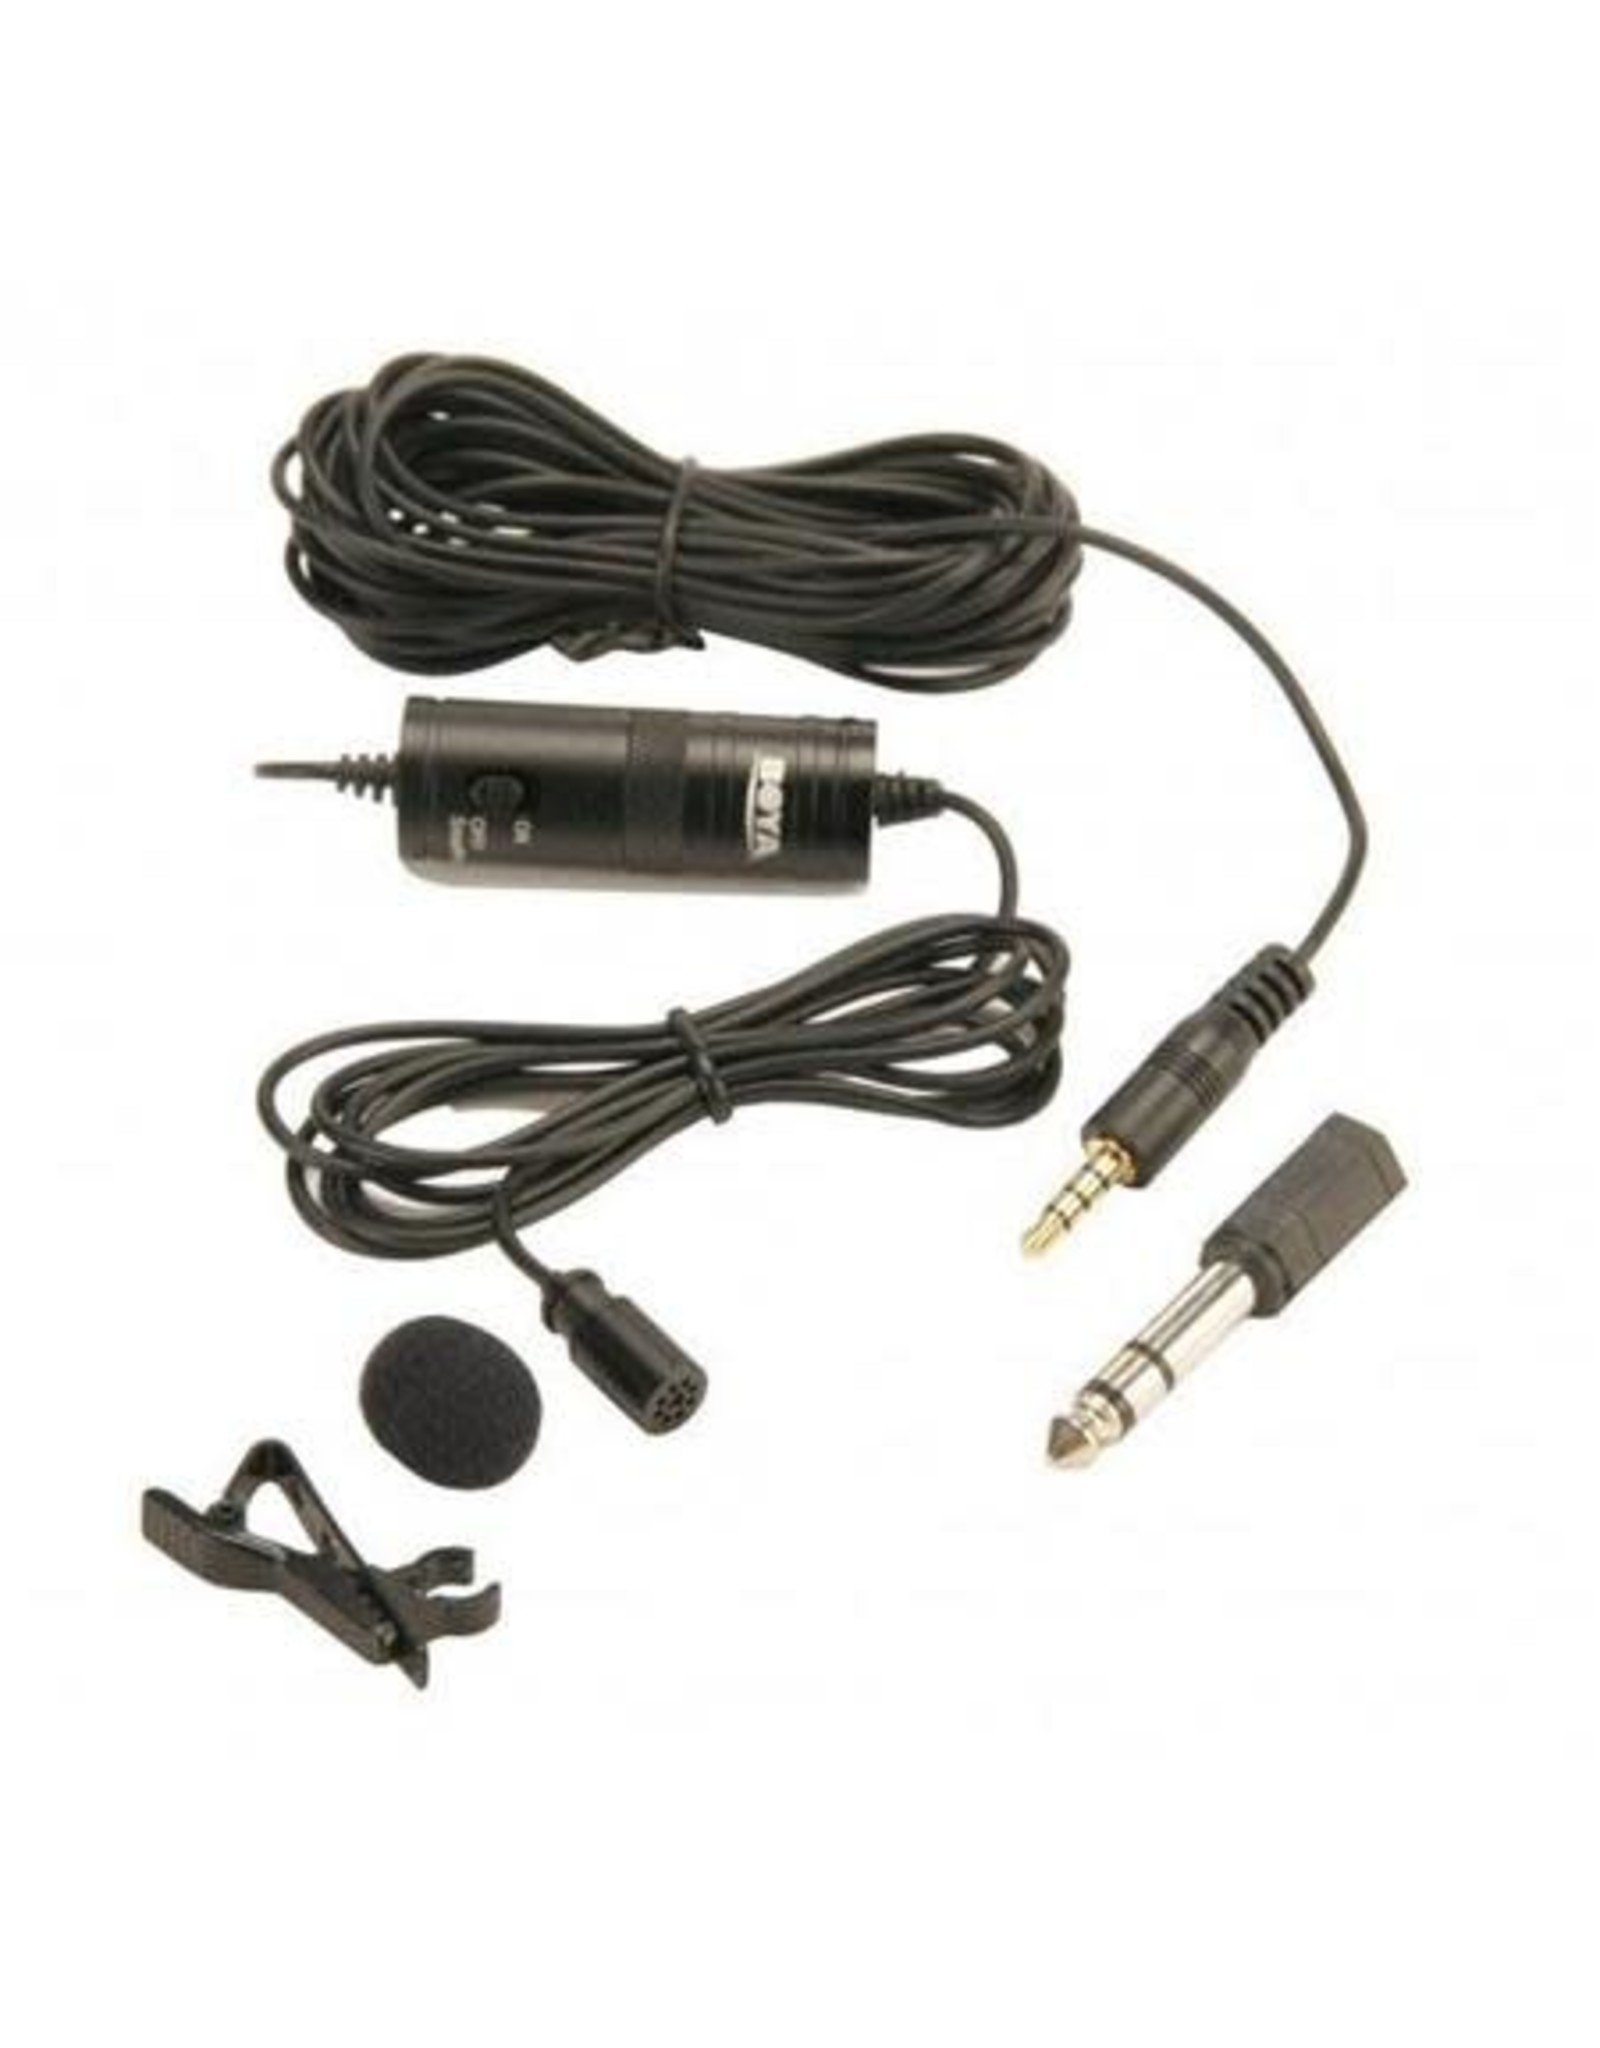 Smith-Victor Smith-Victor Omni-Directional Condenser Lavalier Microphone